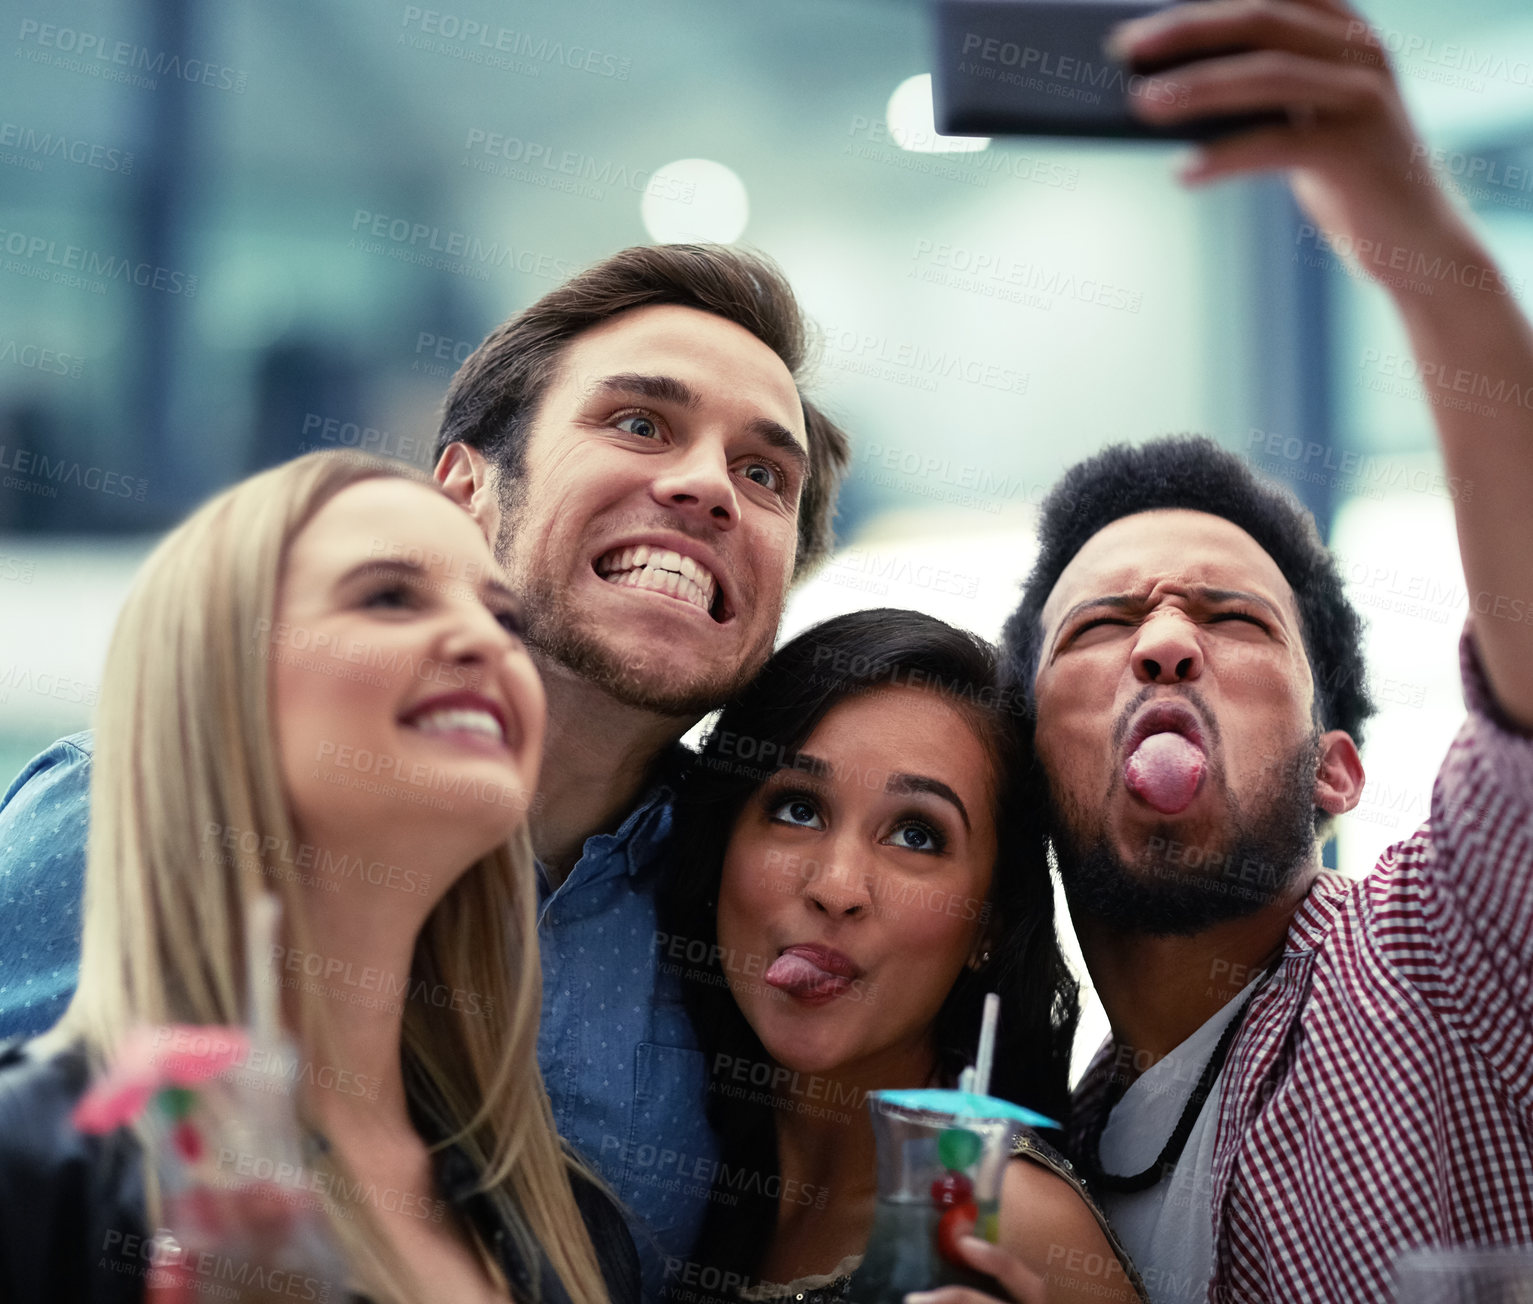 Buy stock photo Shot of a happy group of friends taking a selfie with a smartphone in a nightclub